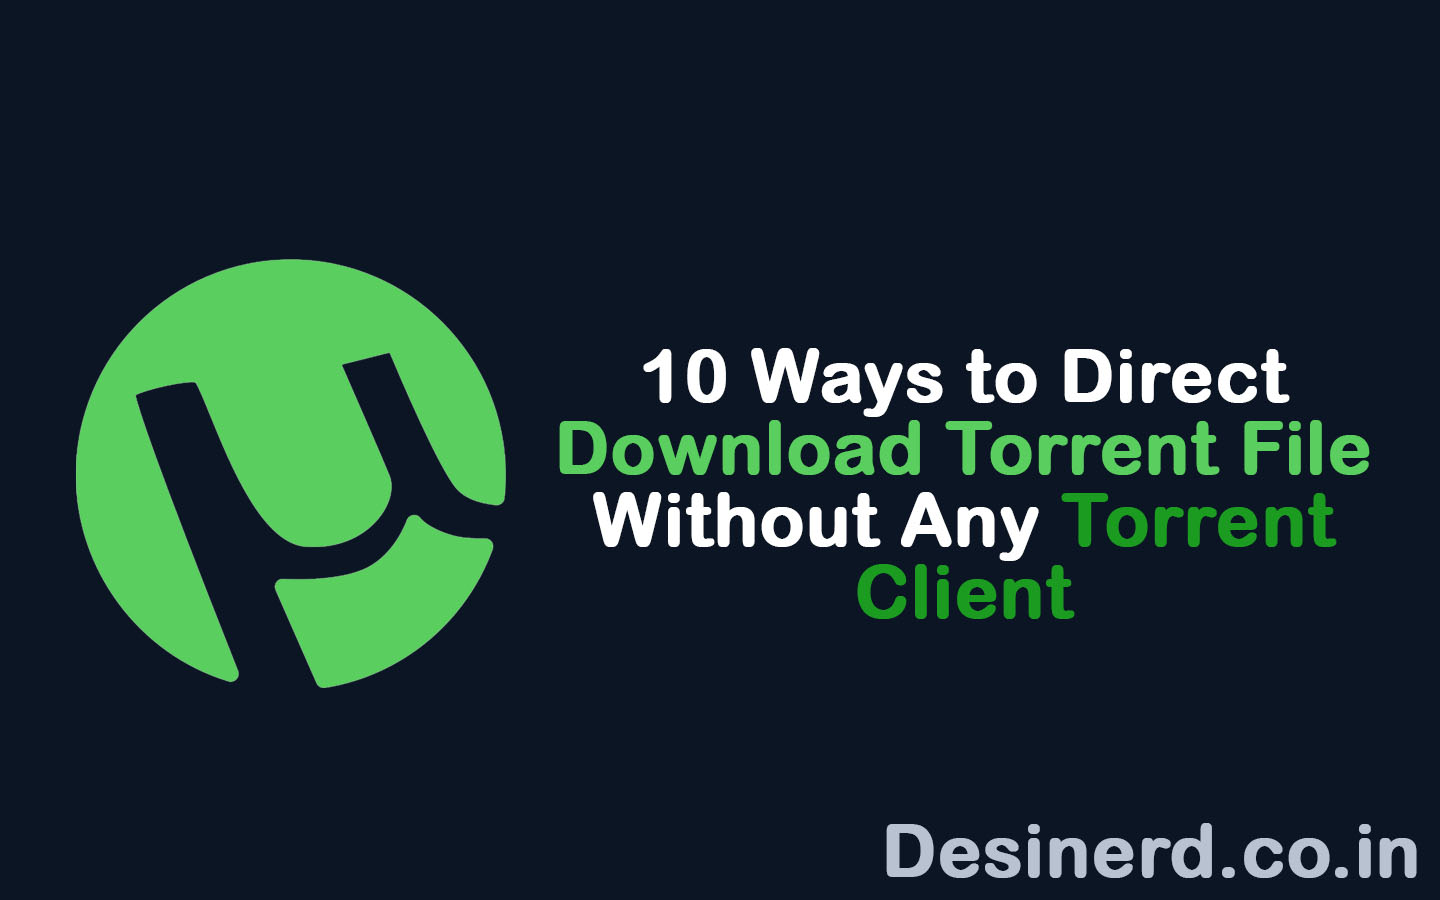 10 Ways to Direct Download Torrent File Without Any Torrent Client